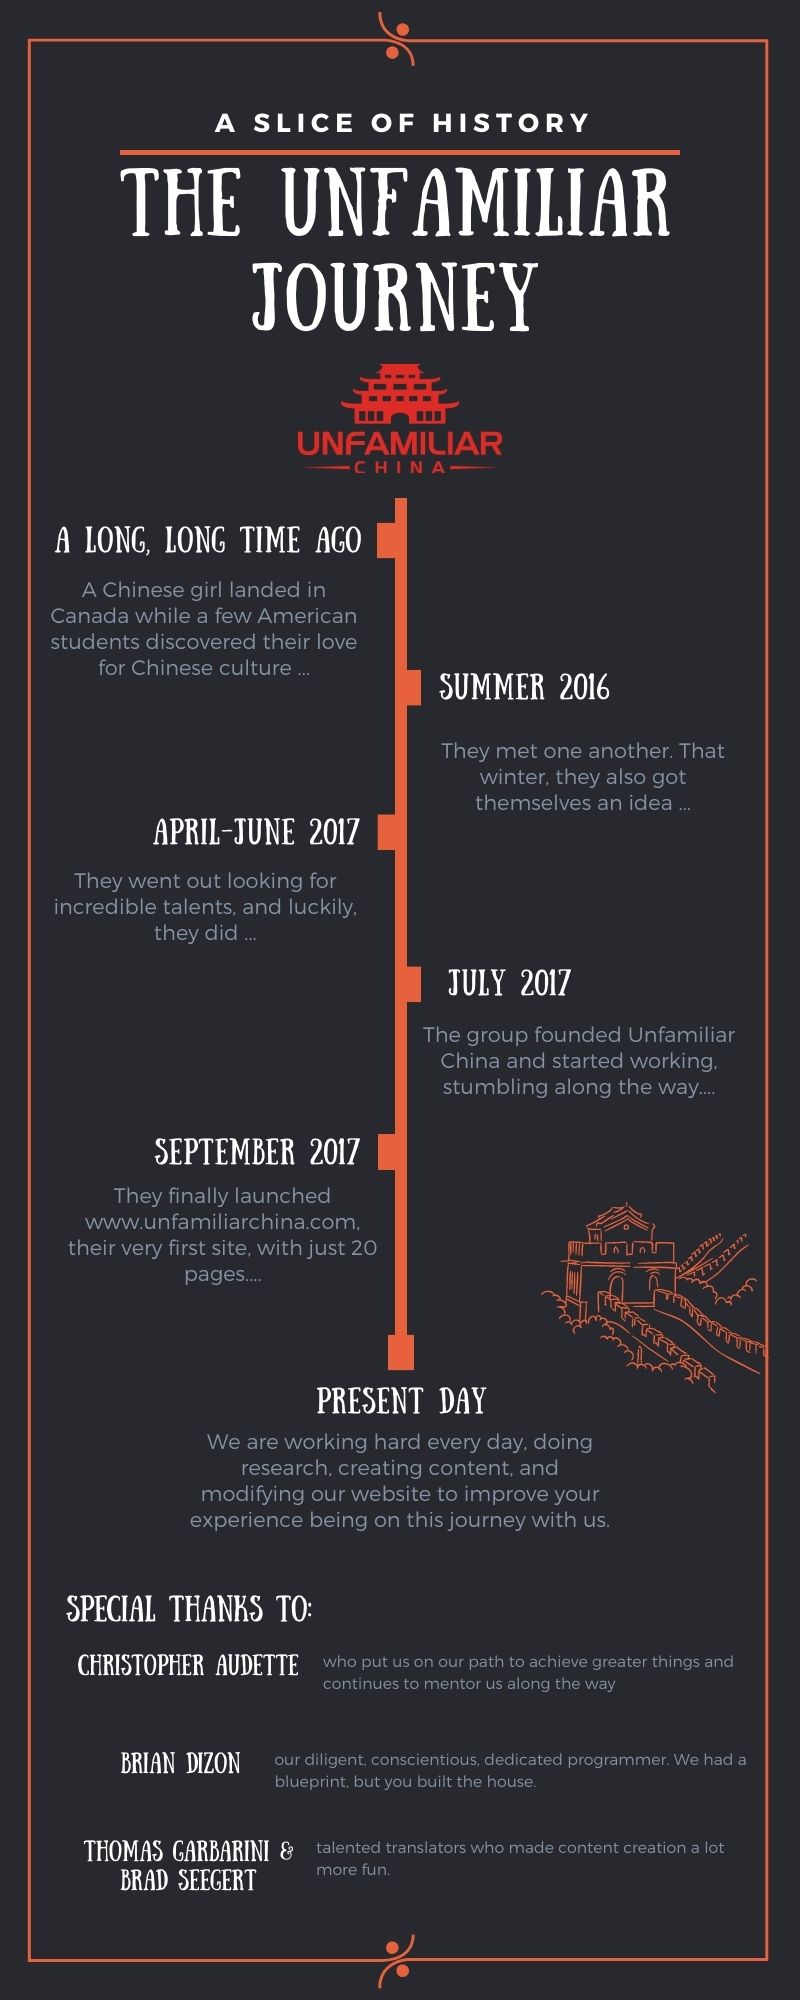 An Infographic About Unfamiliar China and www.unfamiliarchina.com